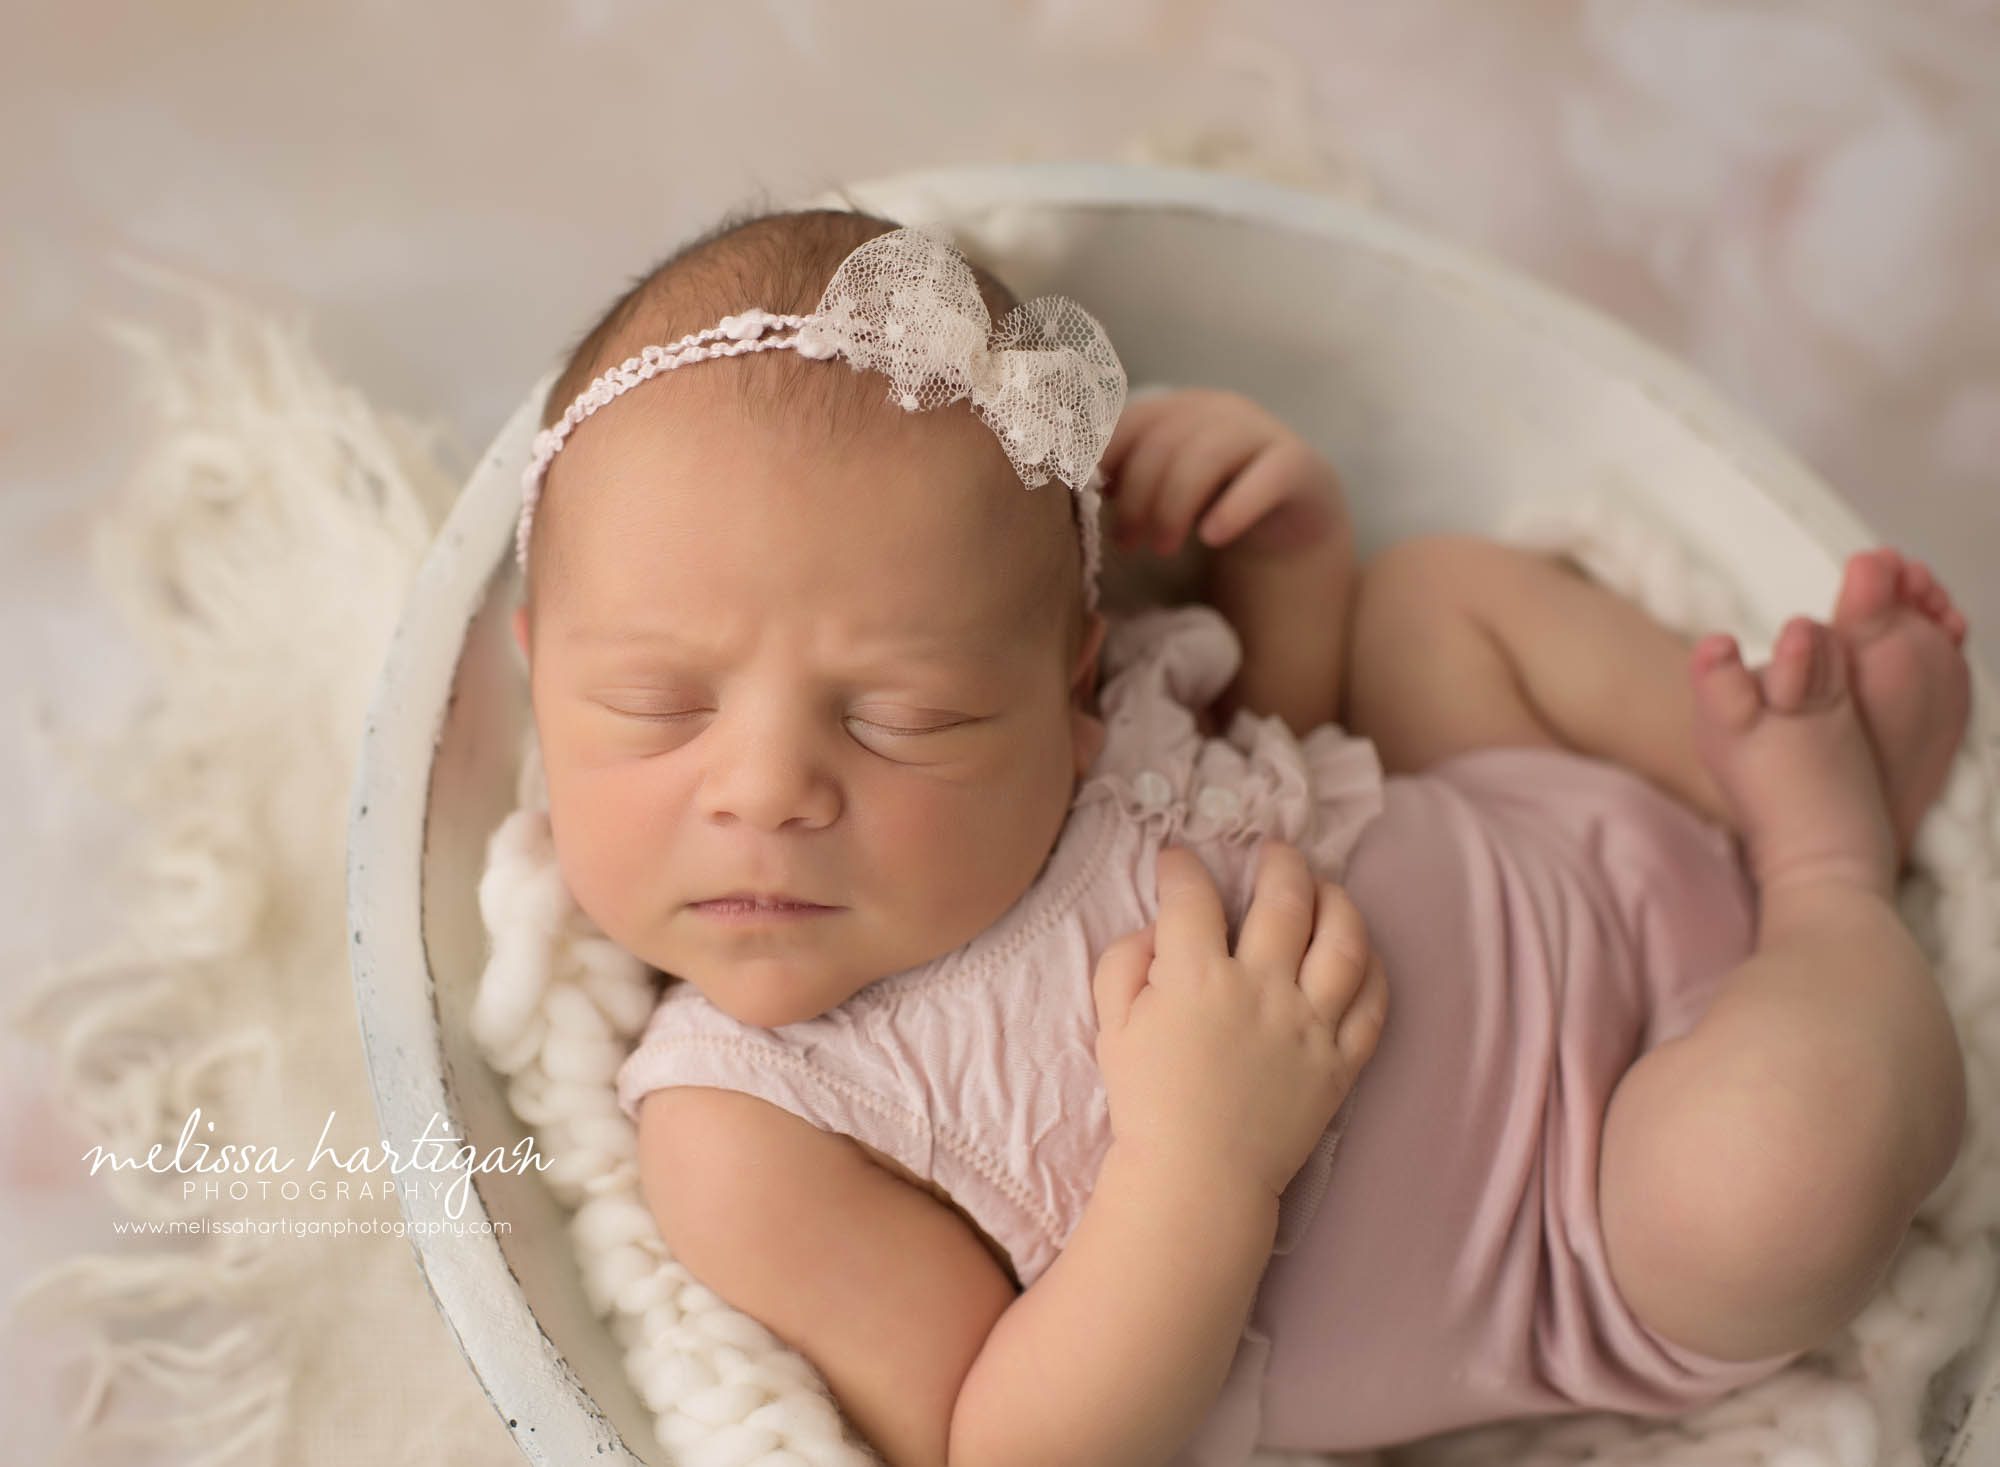 newborn baby girl posed in wooden bowl wearing pink outfit and bow lace headband windsor CT newborn photography